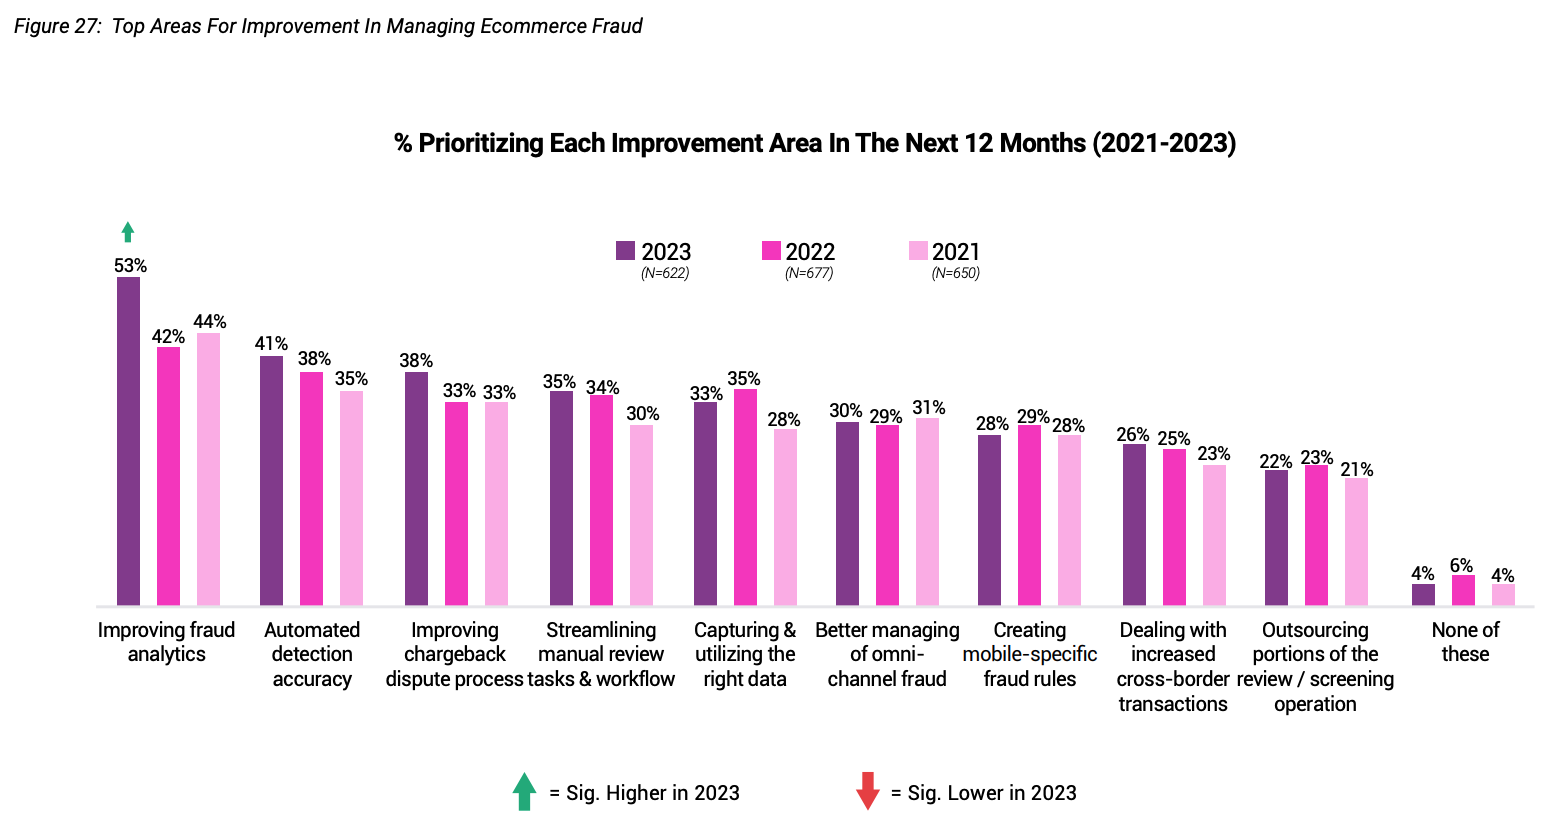 Top Areas For Improvement In Managing Ecommerce Fraud, Source: 2023 Global Ecommerce Payments and Fraud Report; MRC, Cybersource, and Verifi; 2023